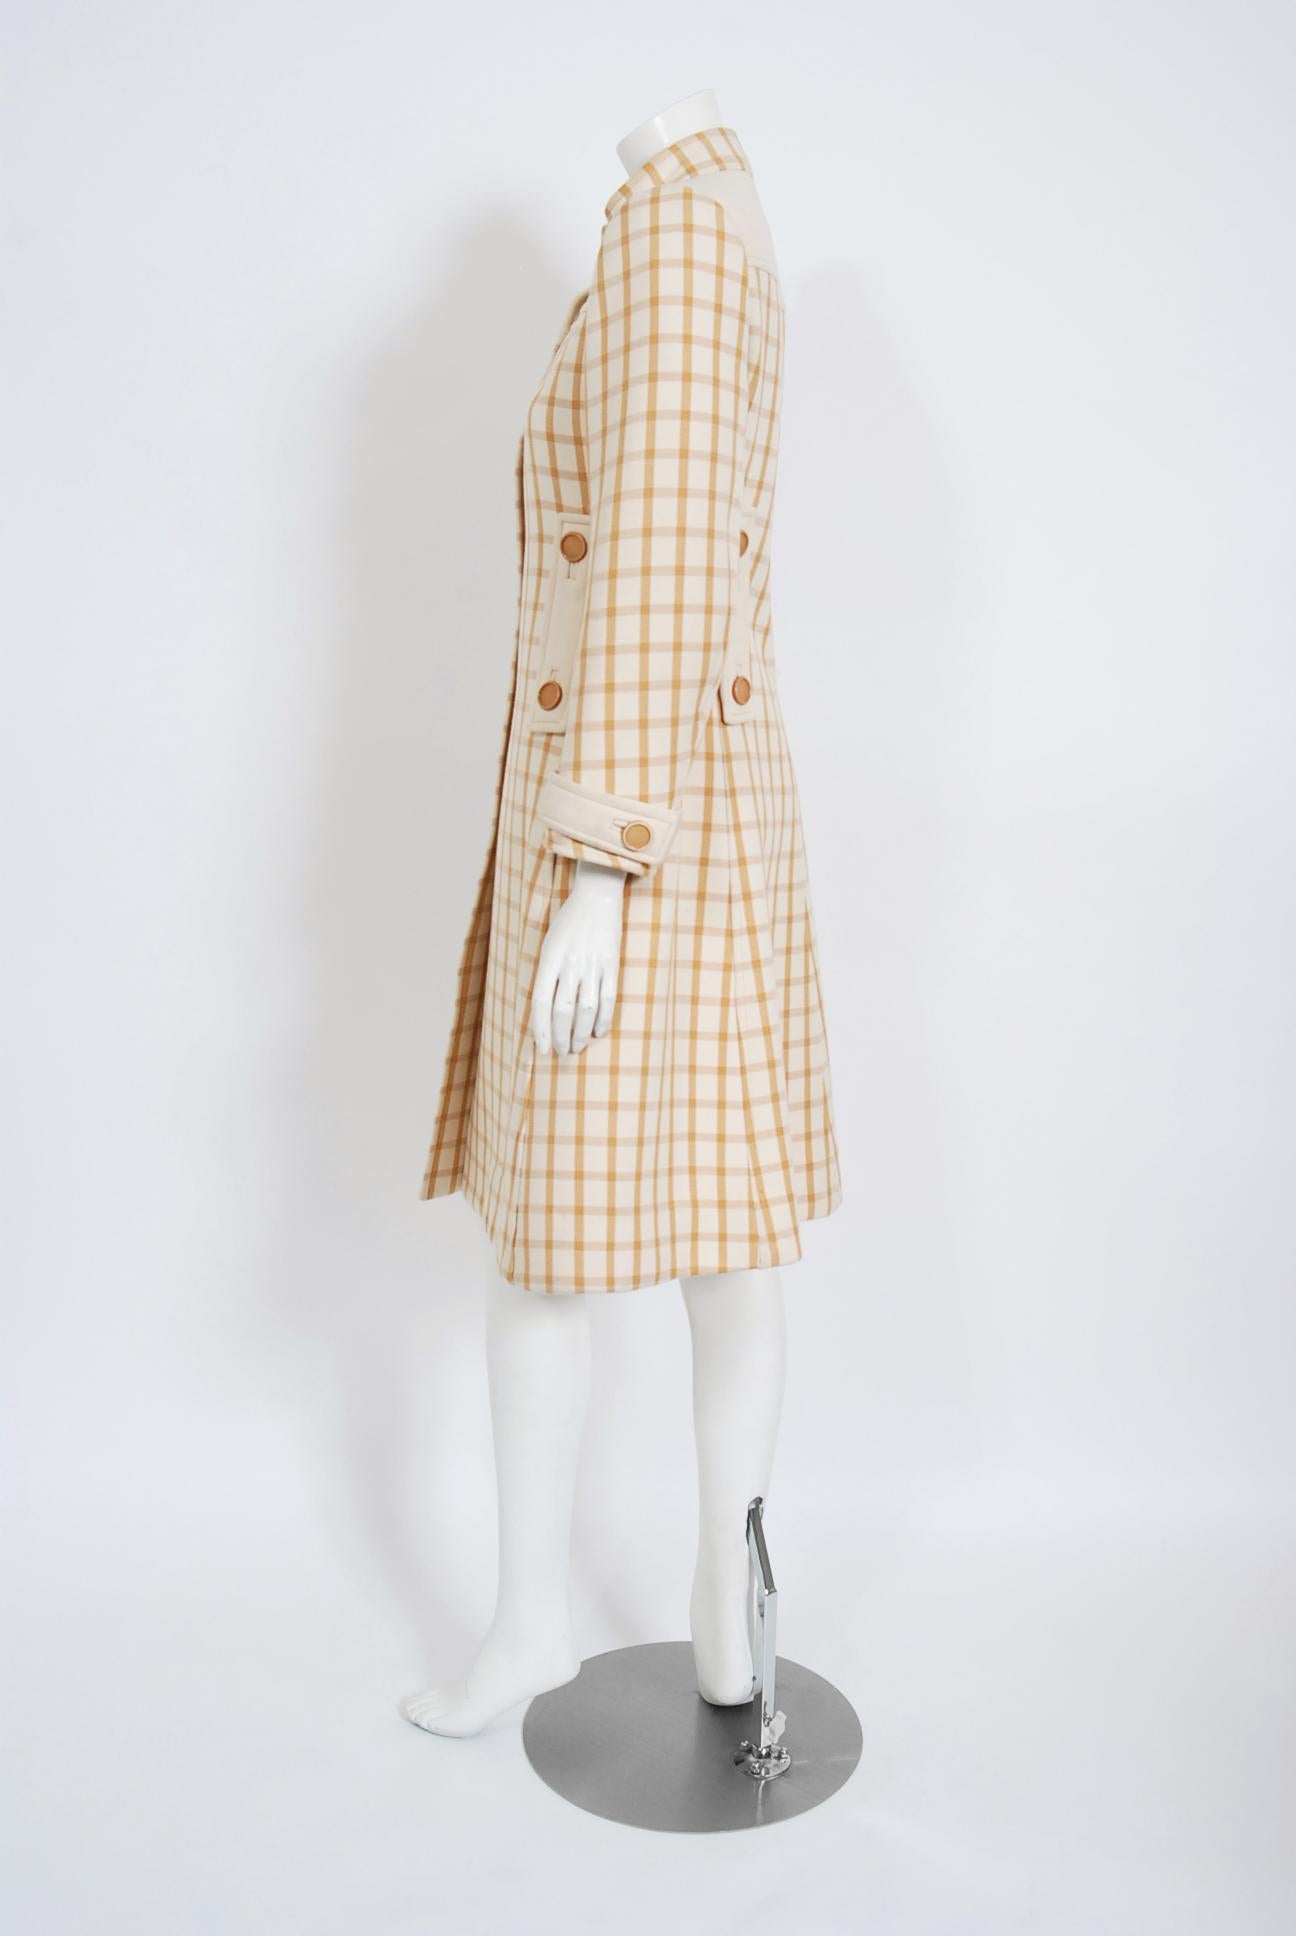 Women's Vintage 1967 Courreges Couture Tan and Ivory Checkered Wool Mod Jacket Coat  